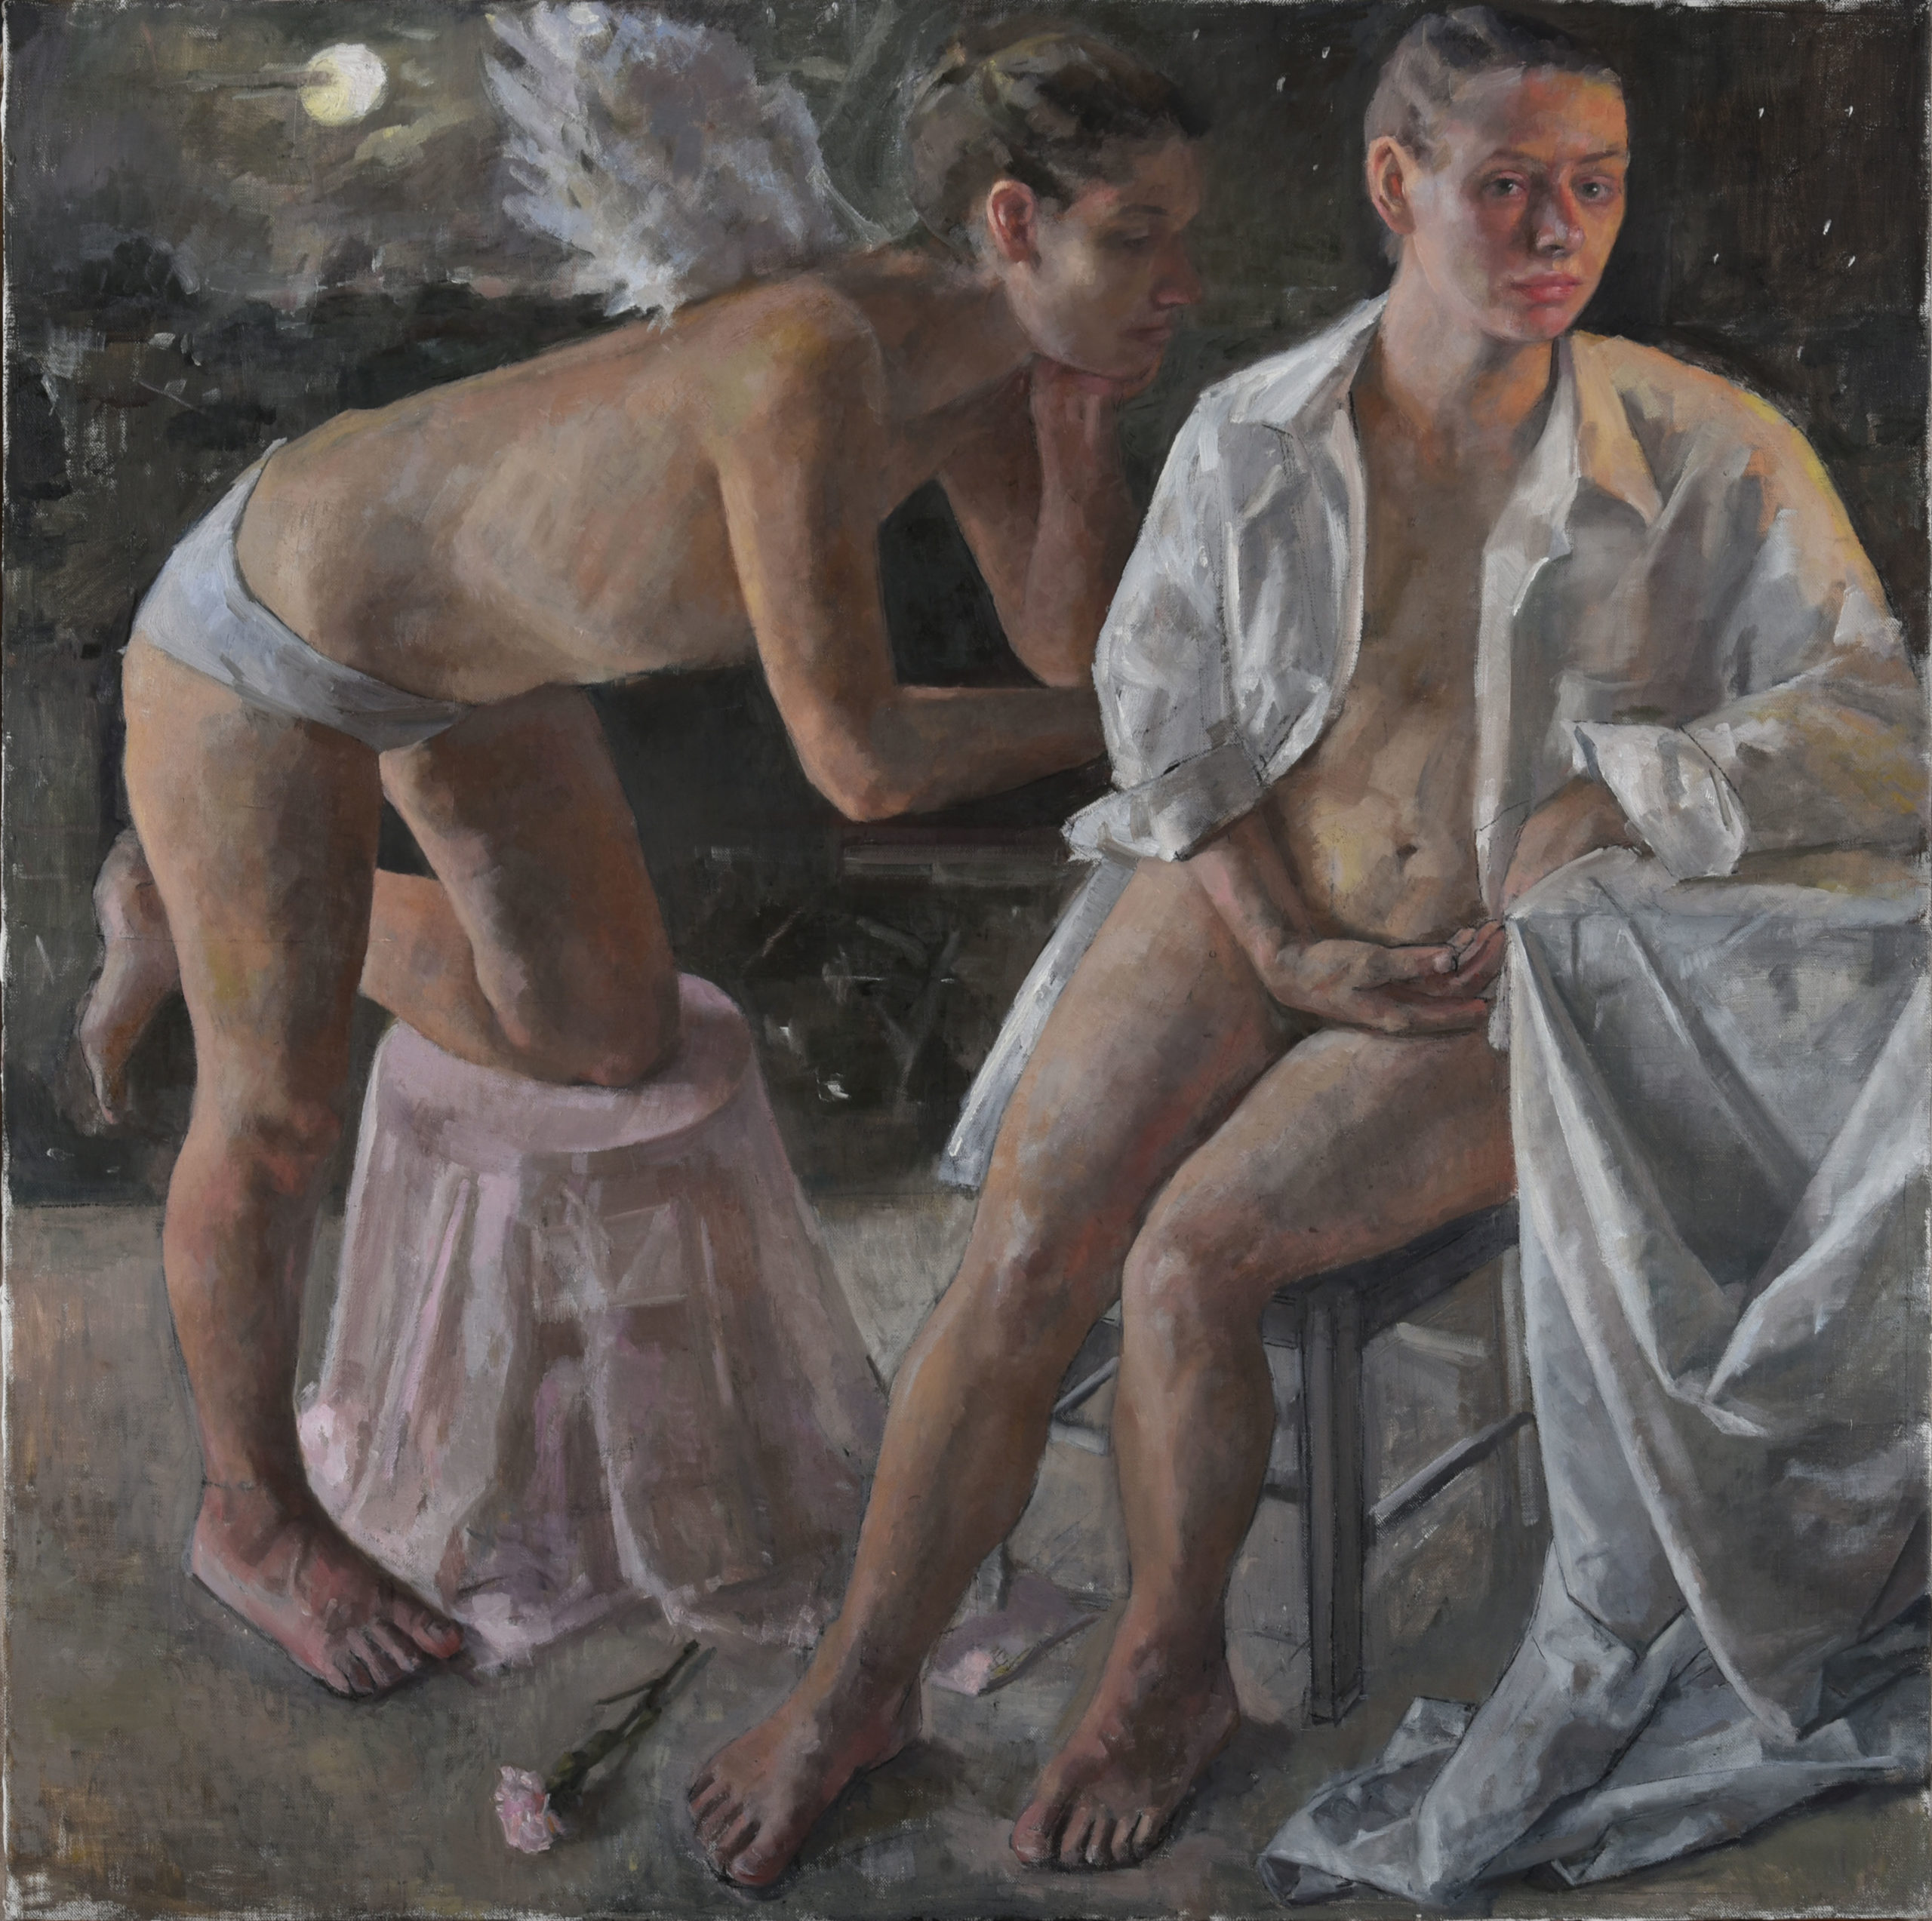 Narrative art - Roni Taharlev, “Not This Light The Other Light,” 2018, Oil on linen mounted on panel, 120 × 120 cm